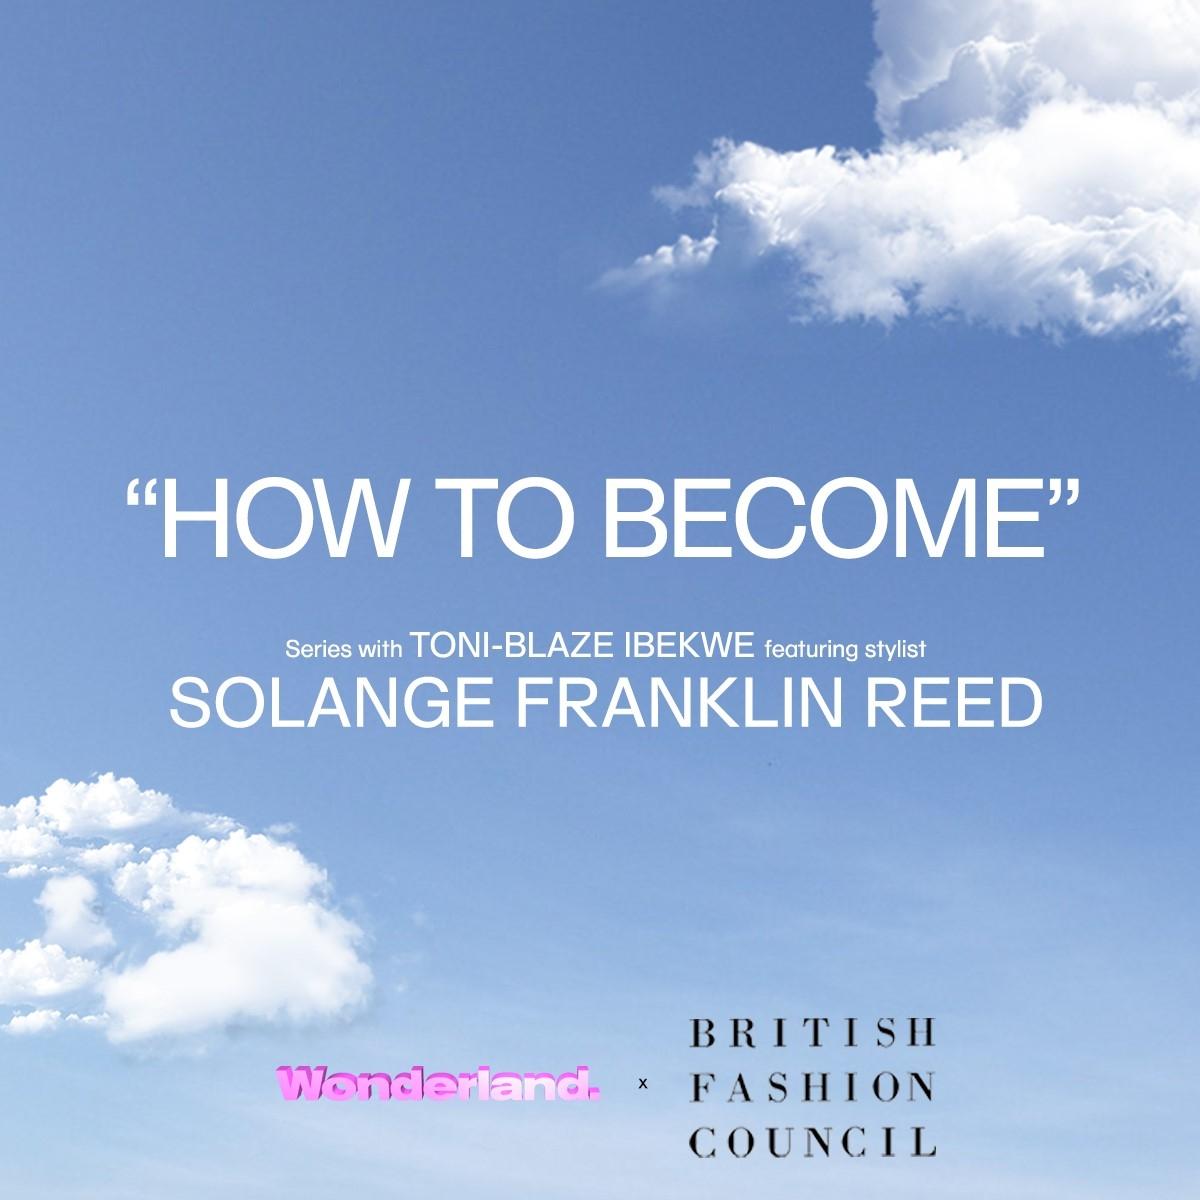 Wonderland & BFC present “How To Become”